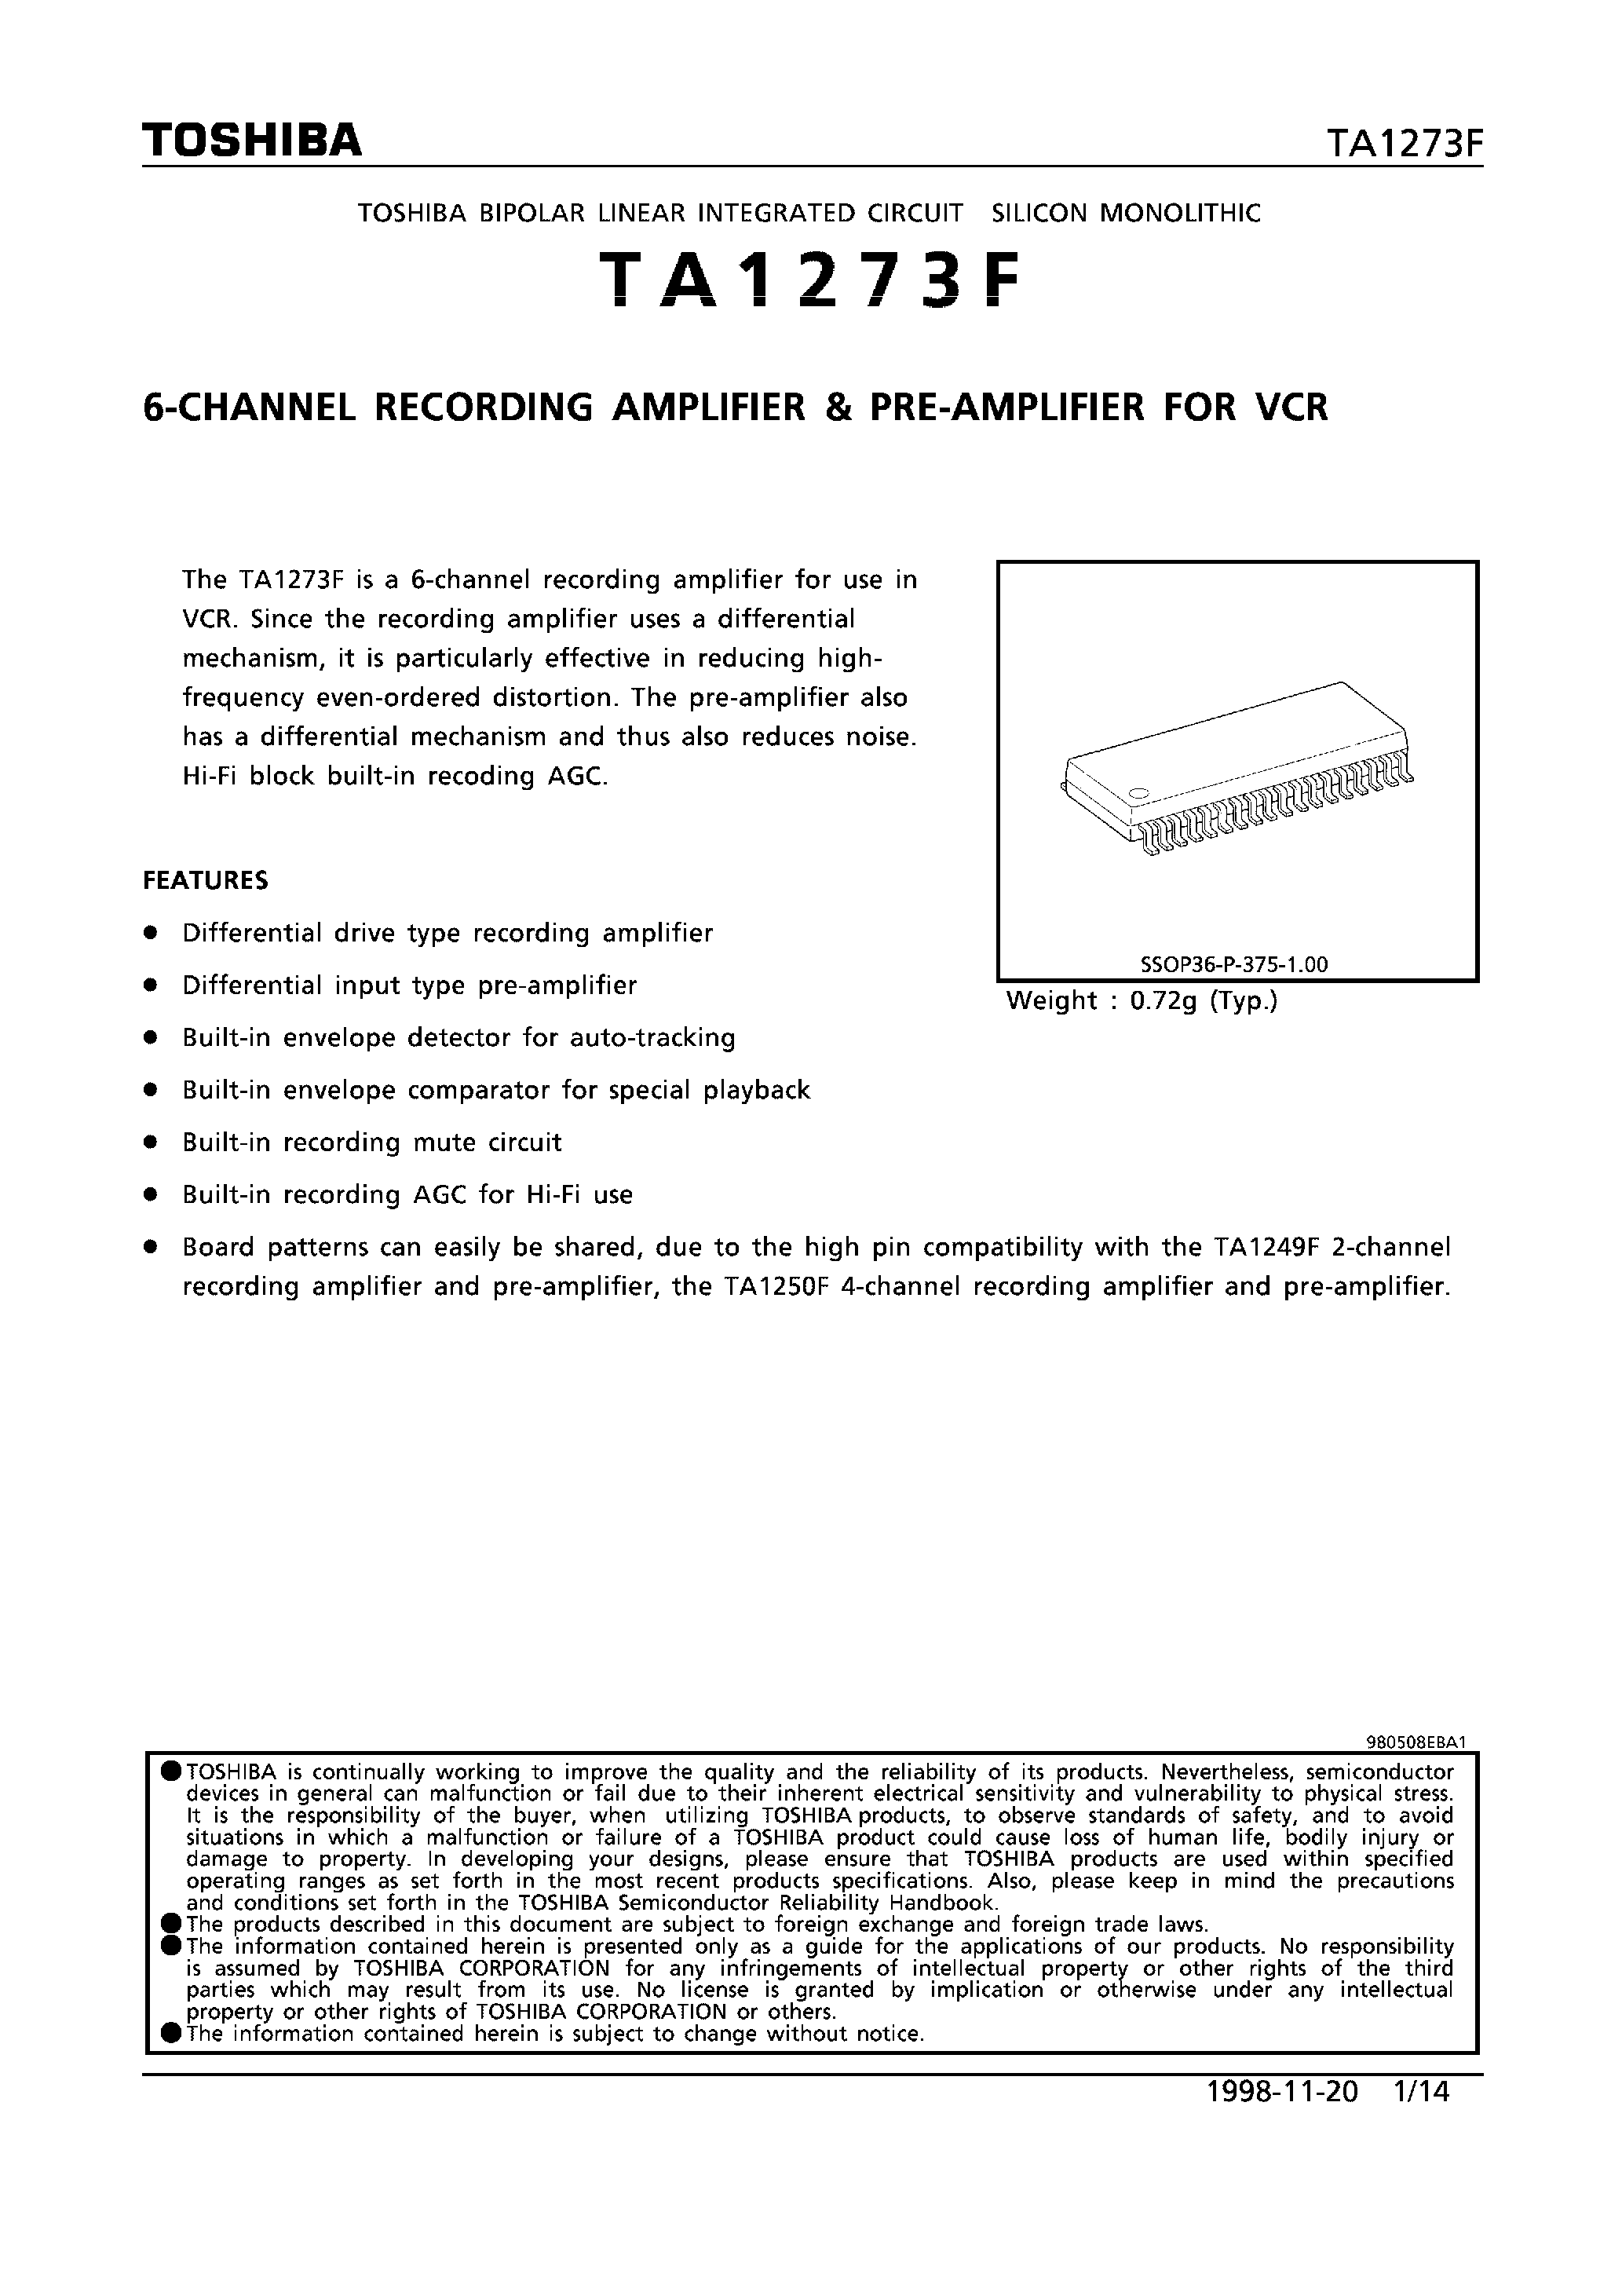 Datasheet TA1273F - 6-CHANNEL RECORDING AMPLIFIER & PRE-AMPLIFIER FOR VCR page 1